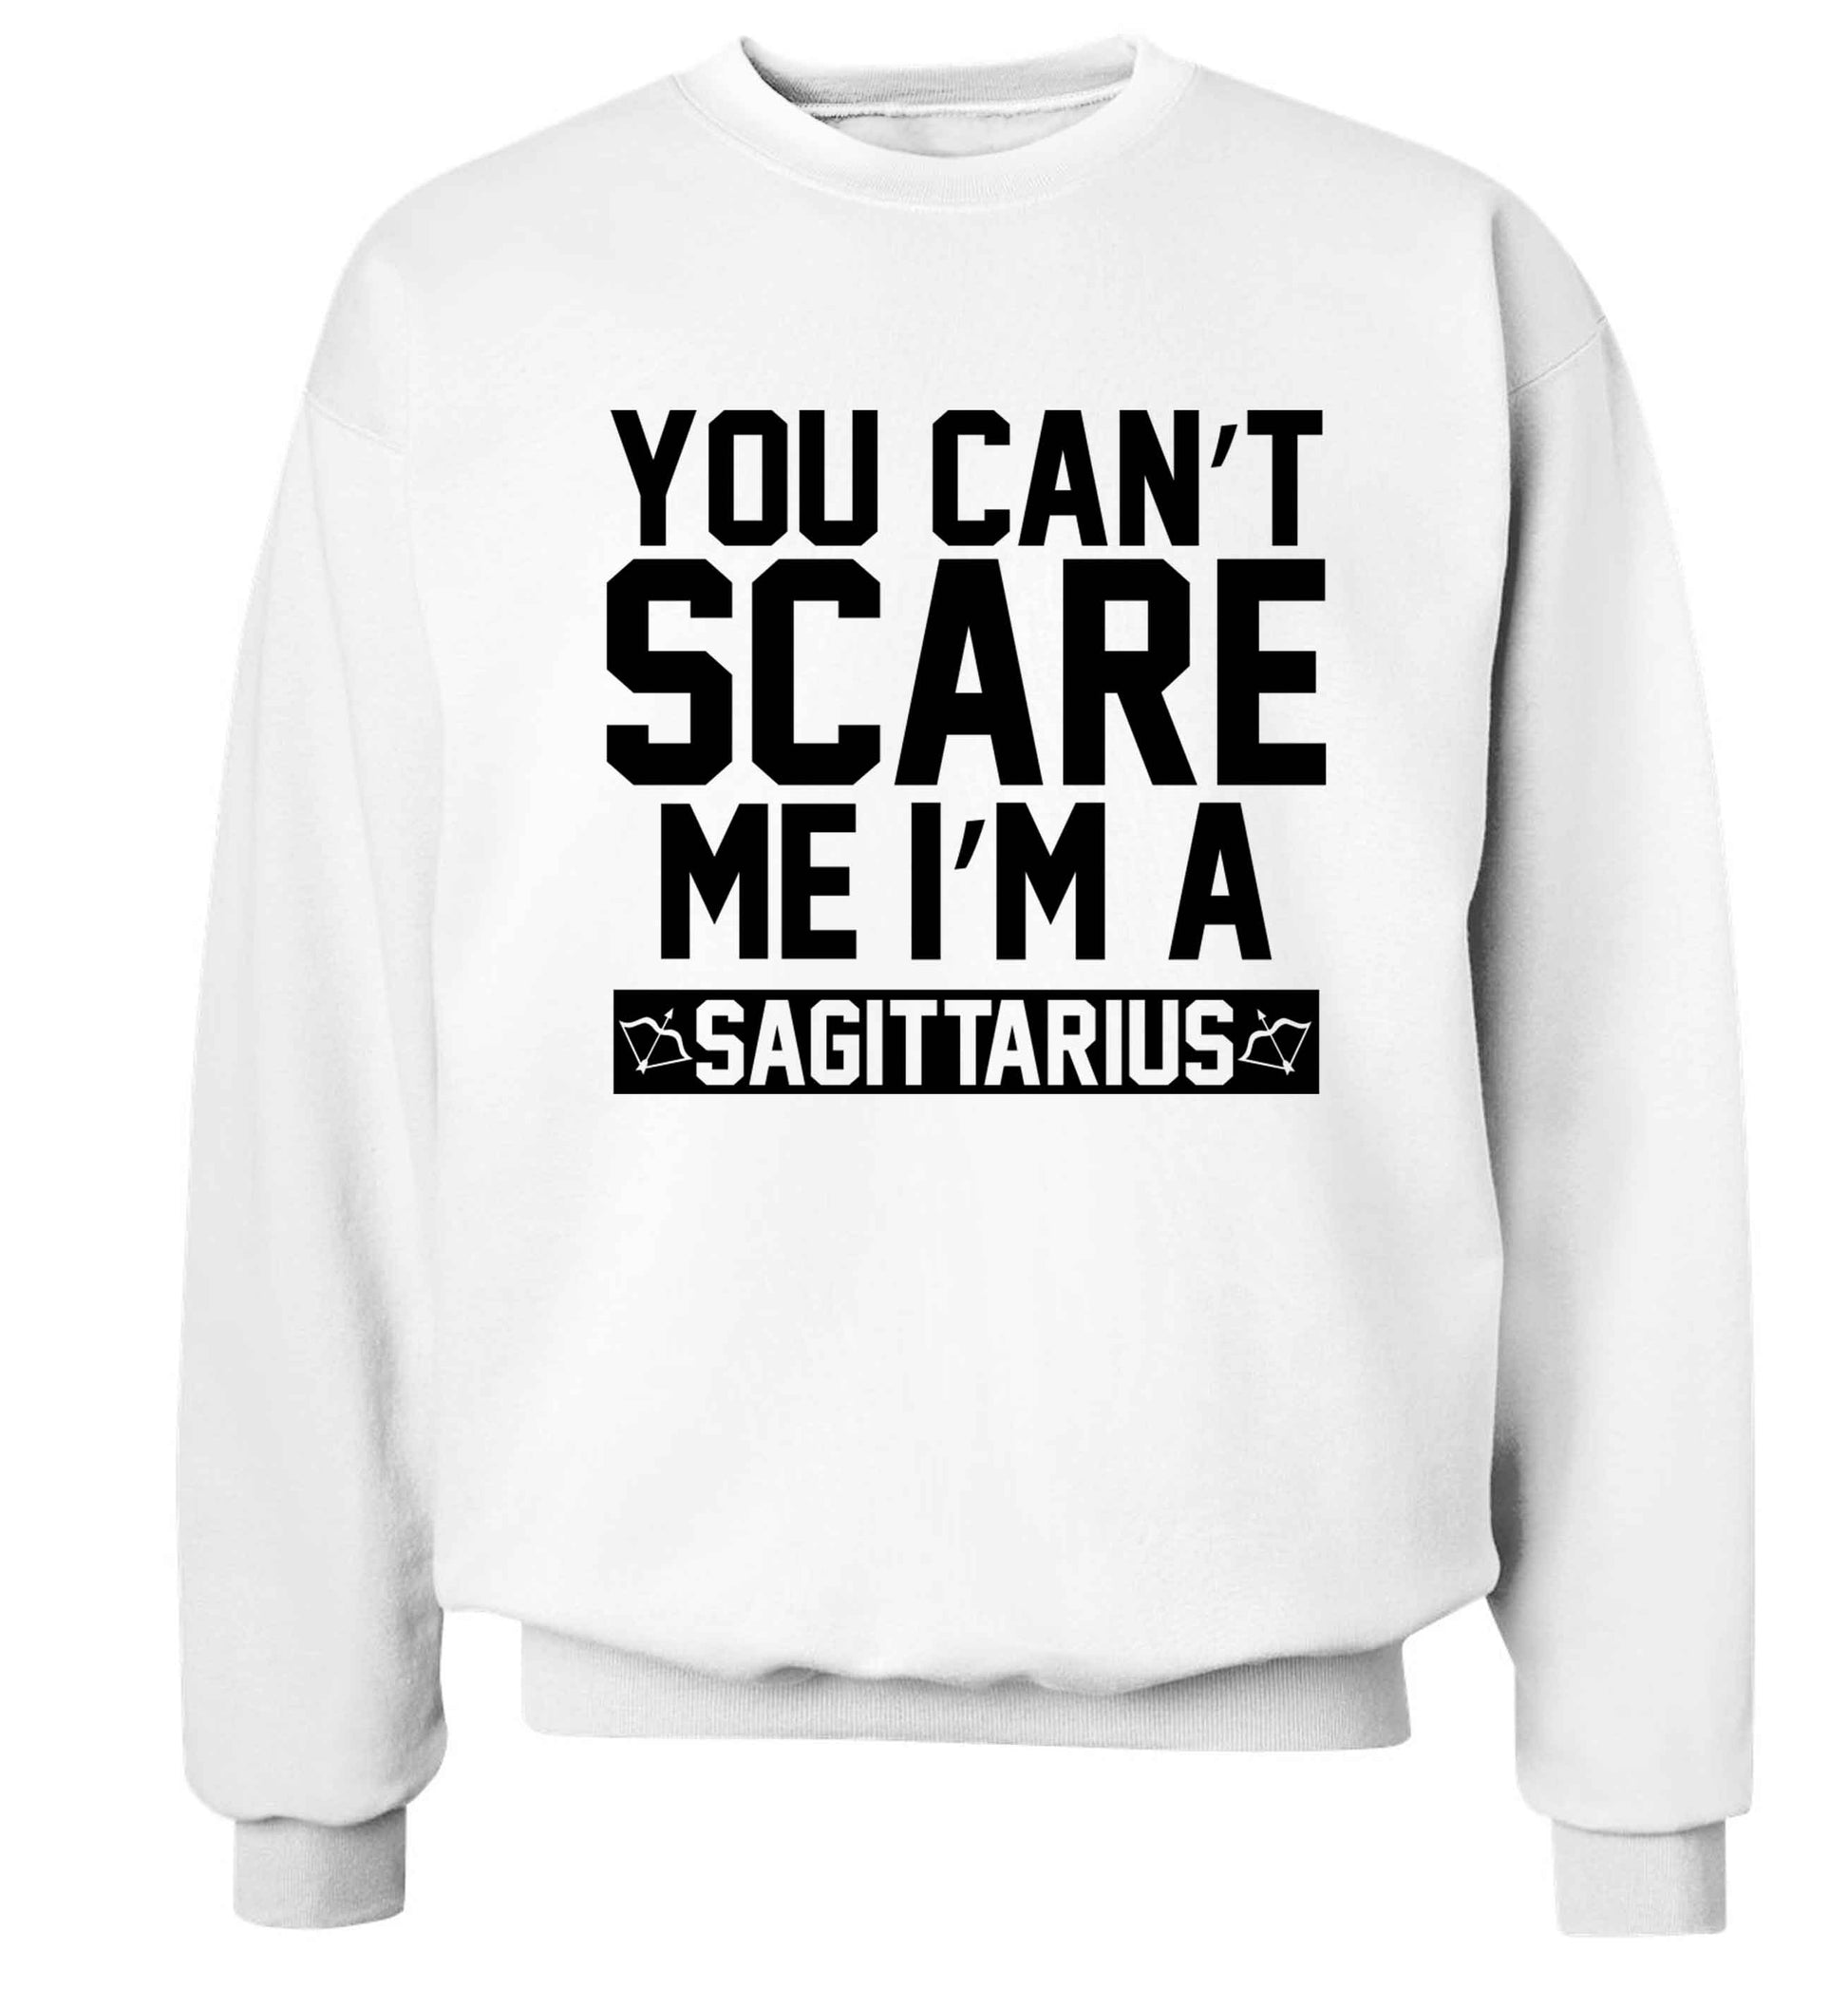 You can't scare me I'm a sagittarius Adult's unisex white Sweater 2XL